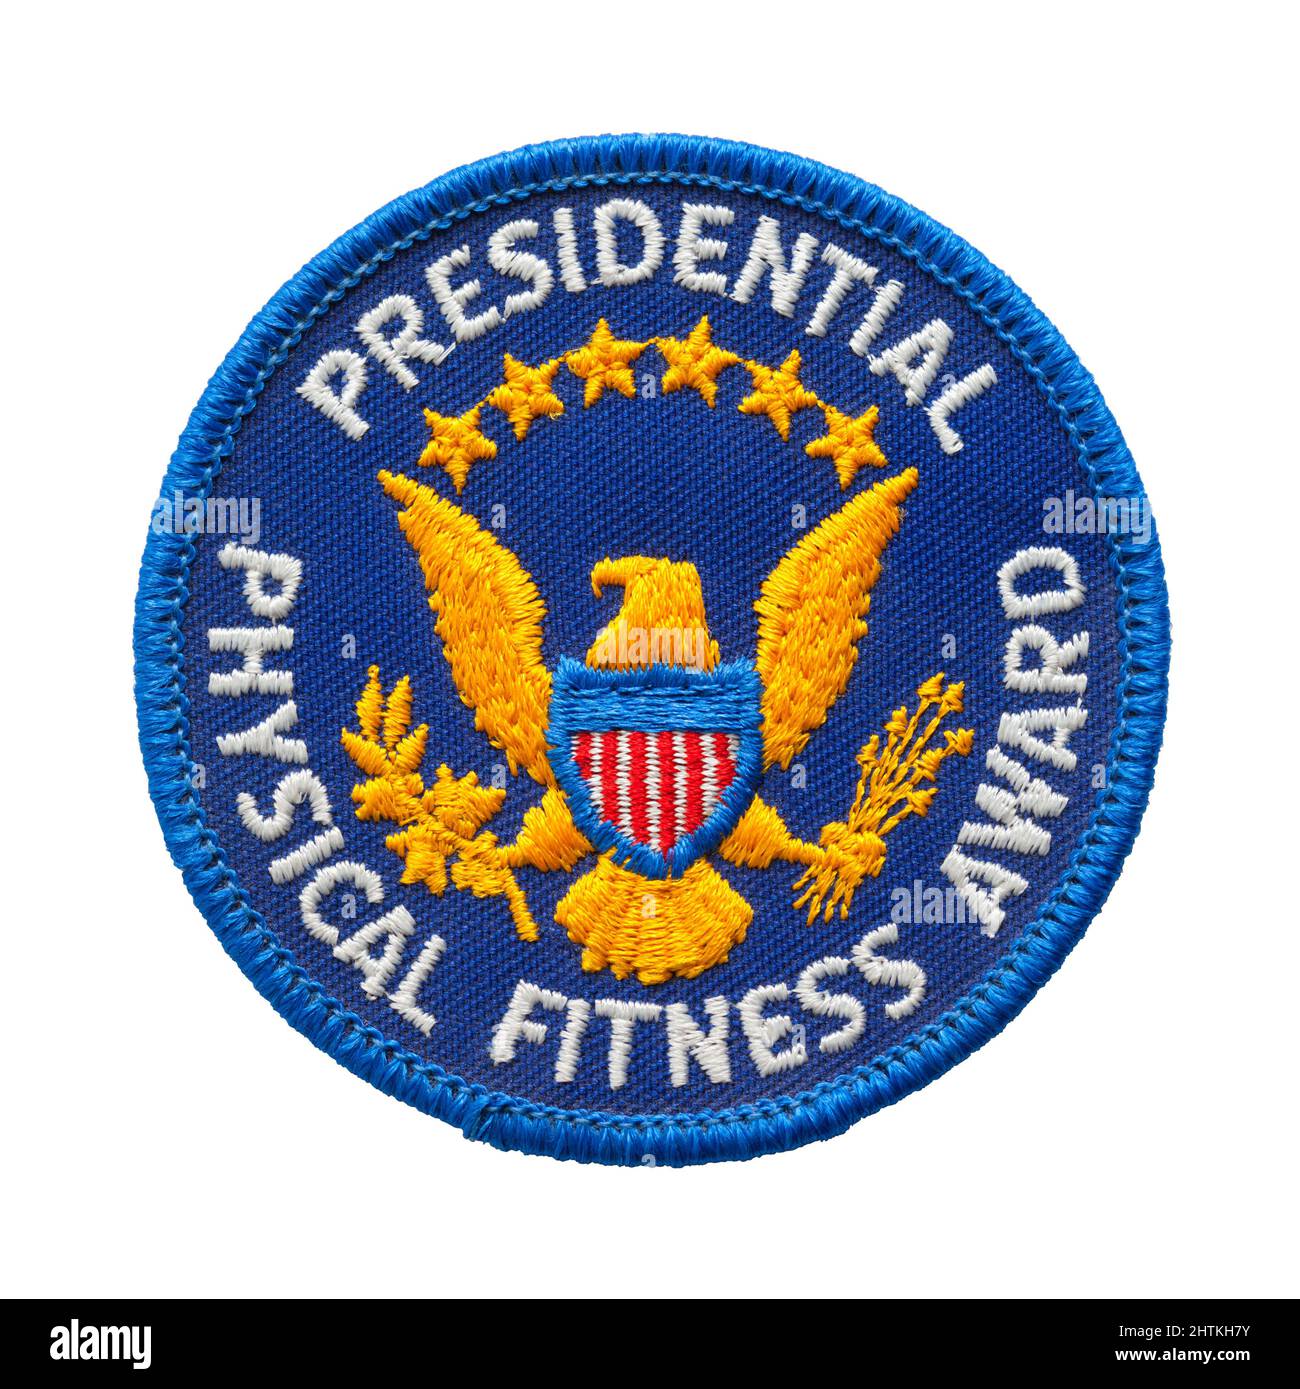 Blue Presidential Physical Fitness Award Patch Cut out on White. Foto Stock